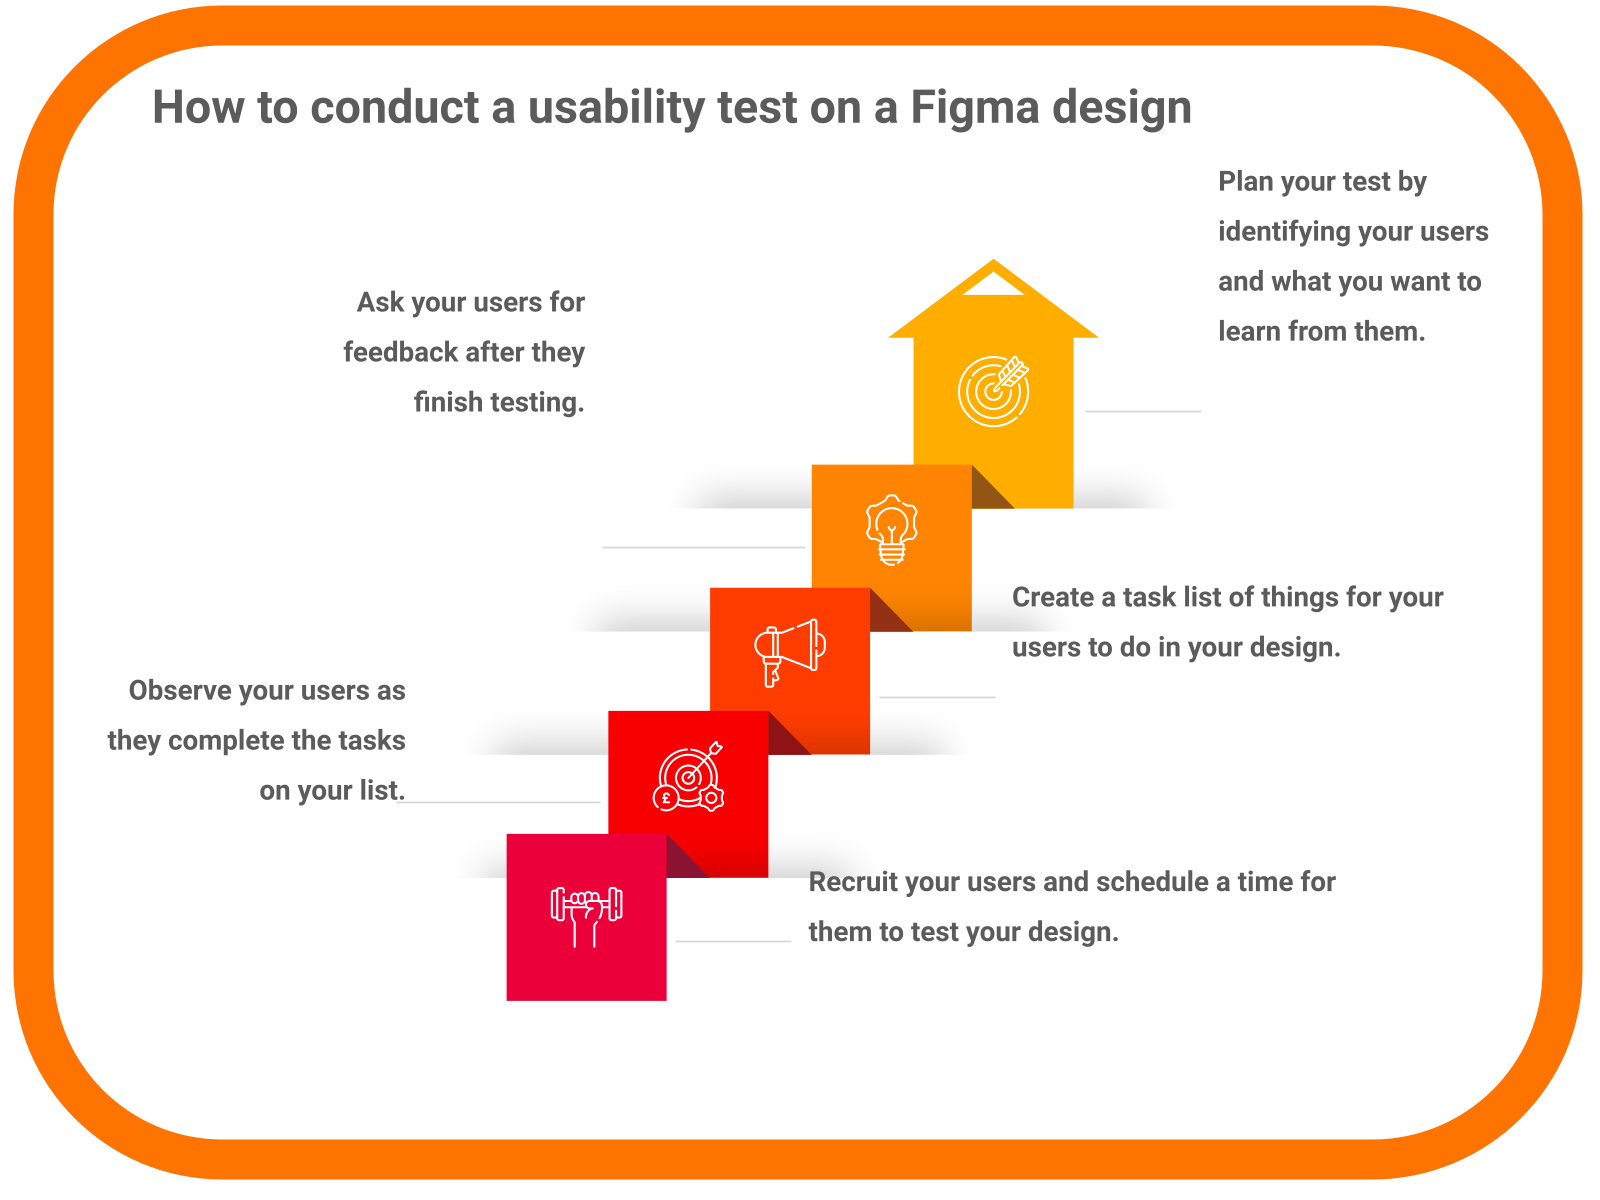 How to conduct a usability test on a Figma design